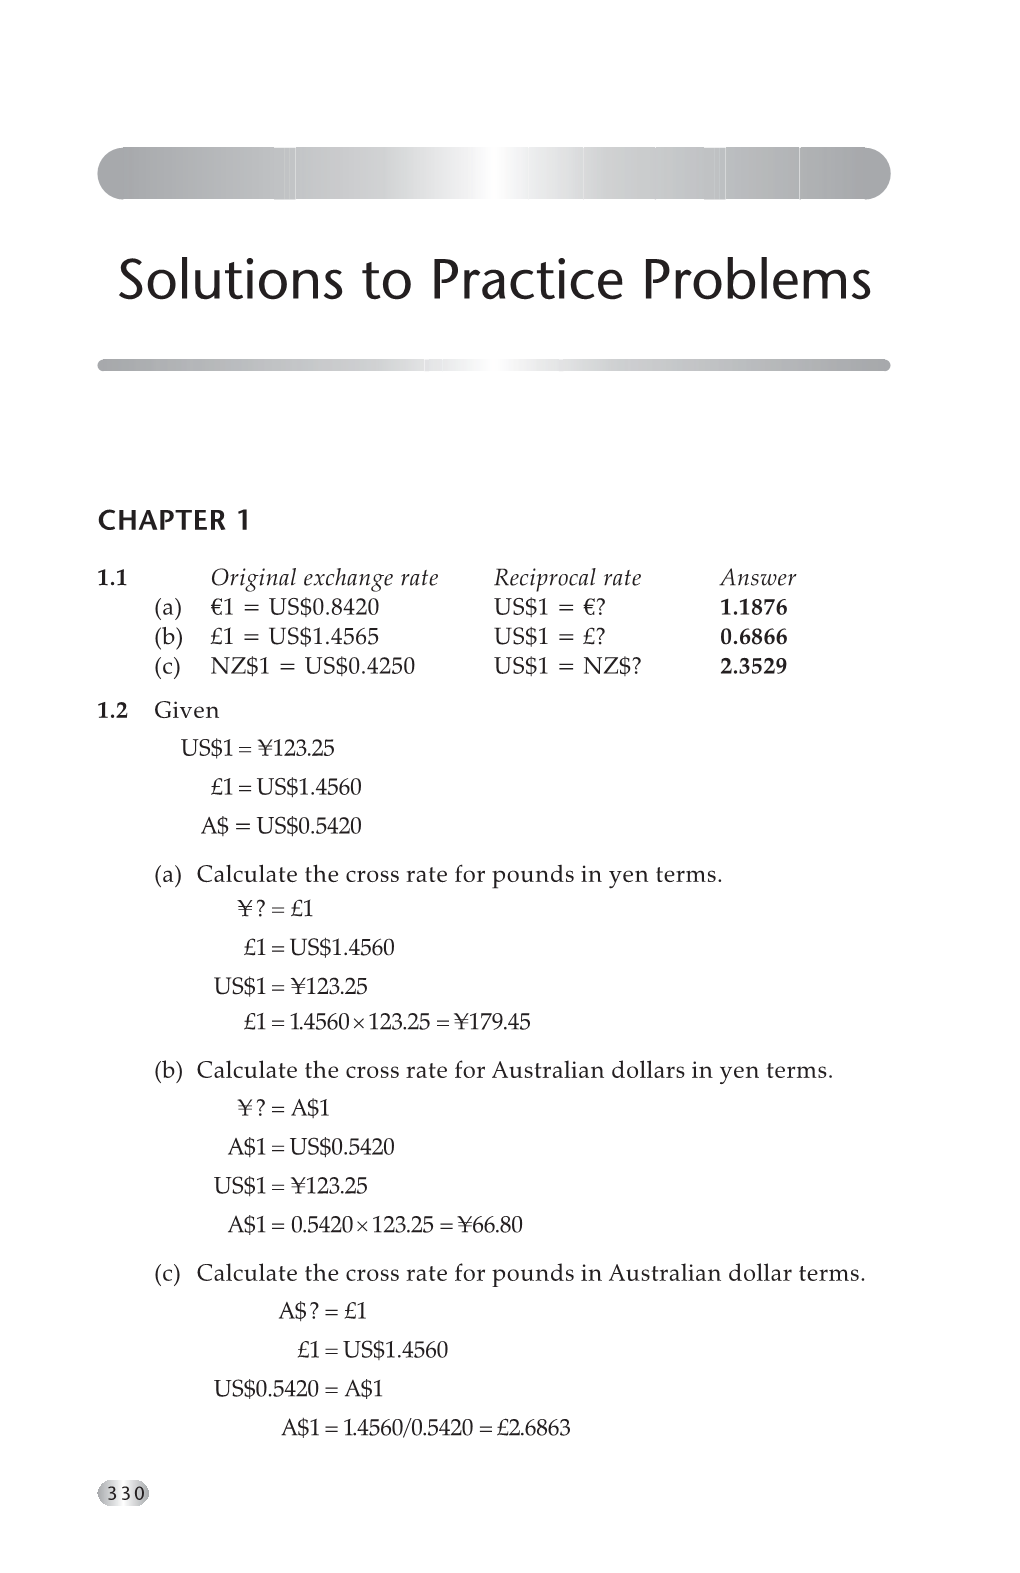 Solutions to Practice Problems